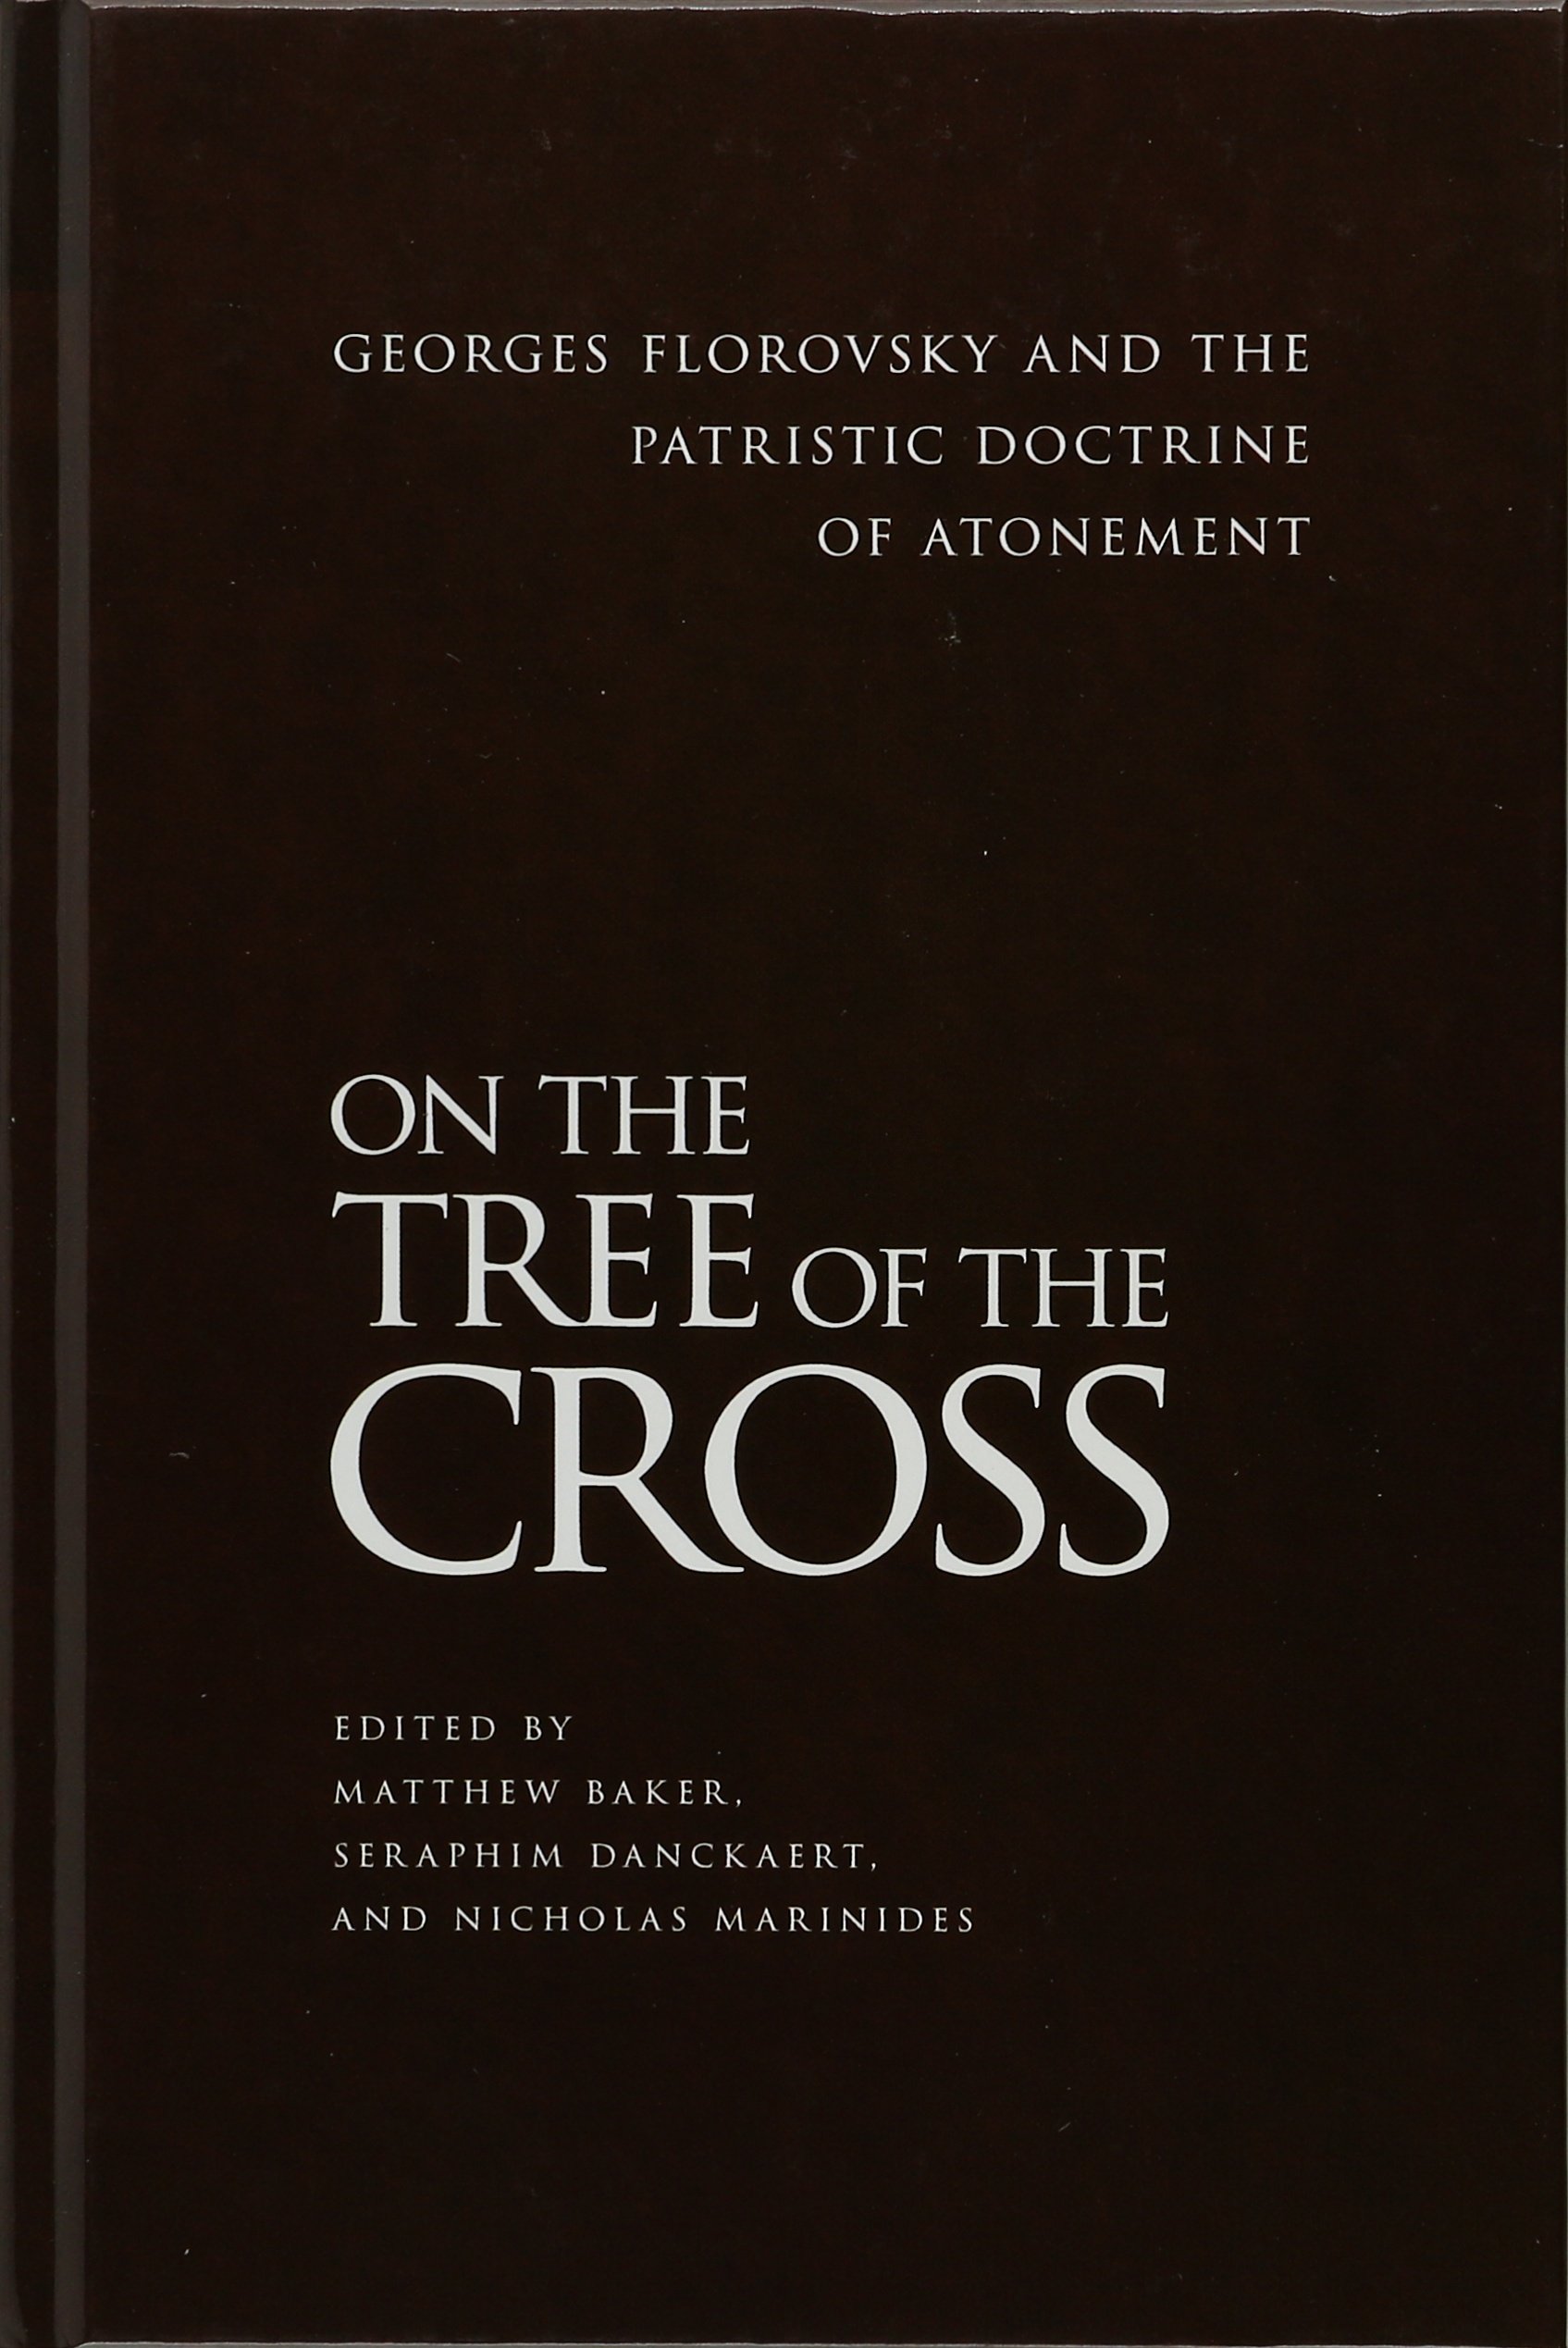 On the Tree of the Cross: Georges Florovsky and the Patristic Doctrine of Atonement 